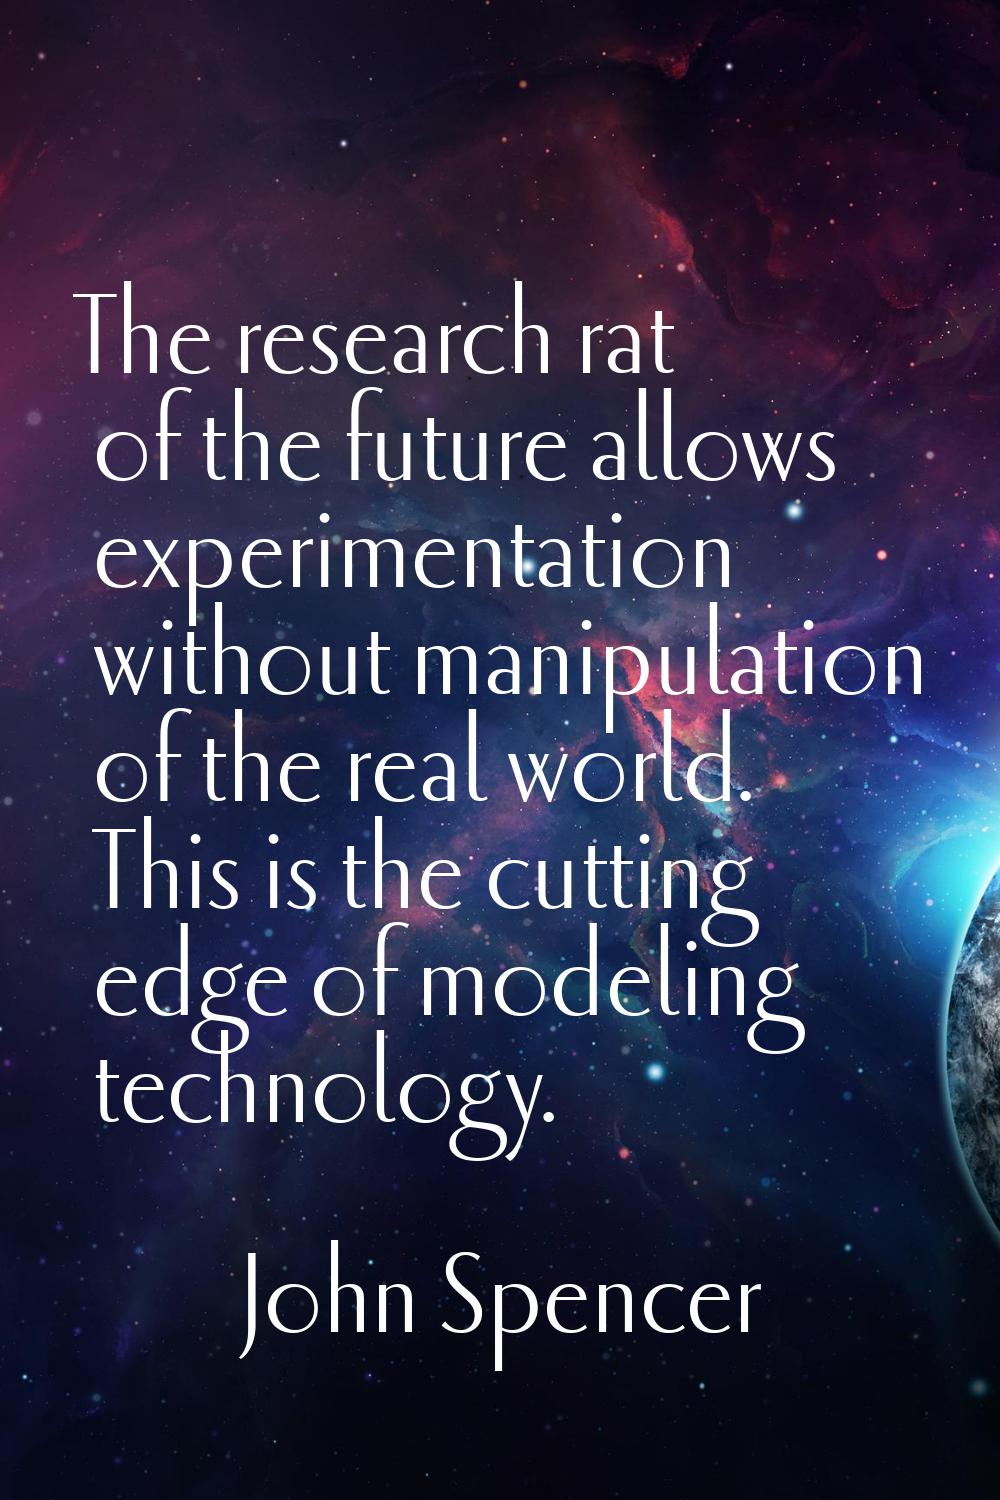 The research rat of the future allows experimentation without manipulation of the real world. This 